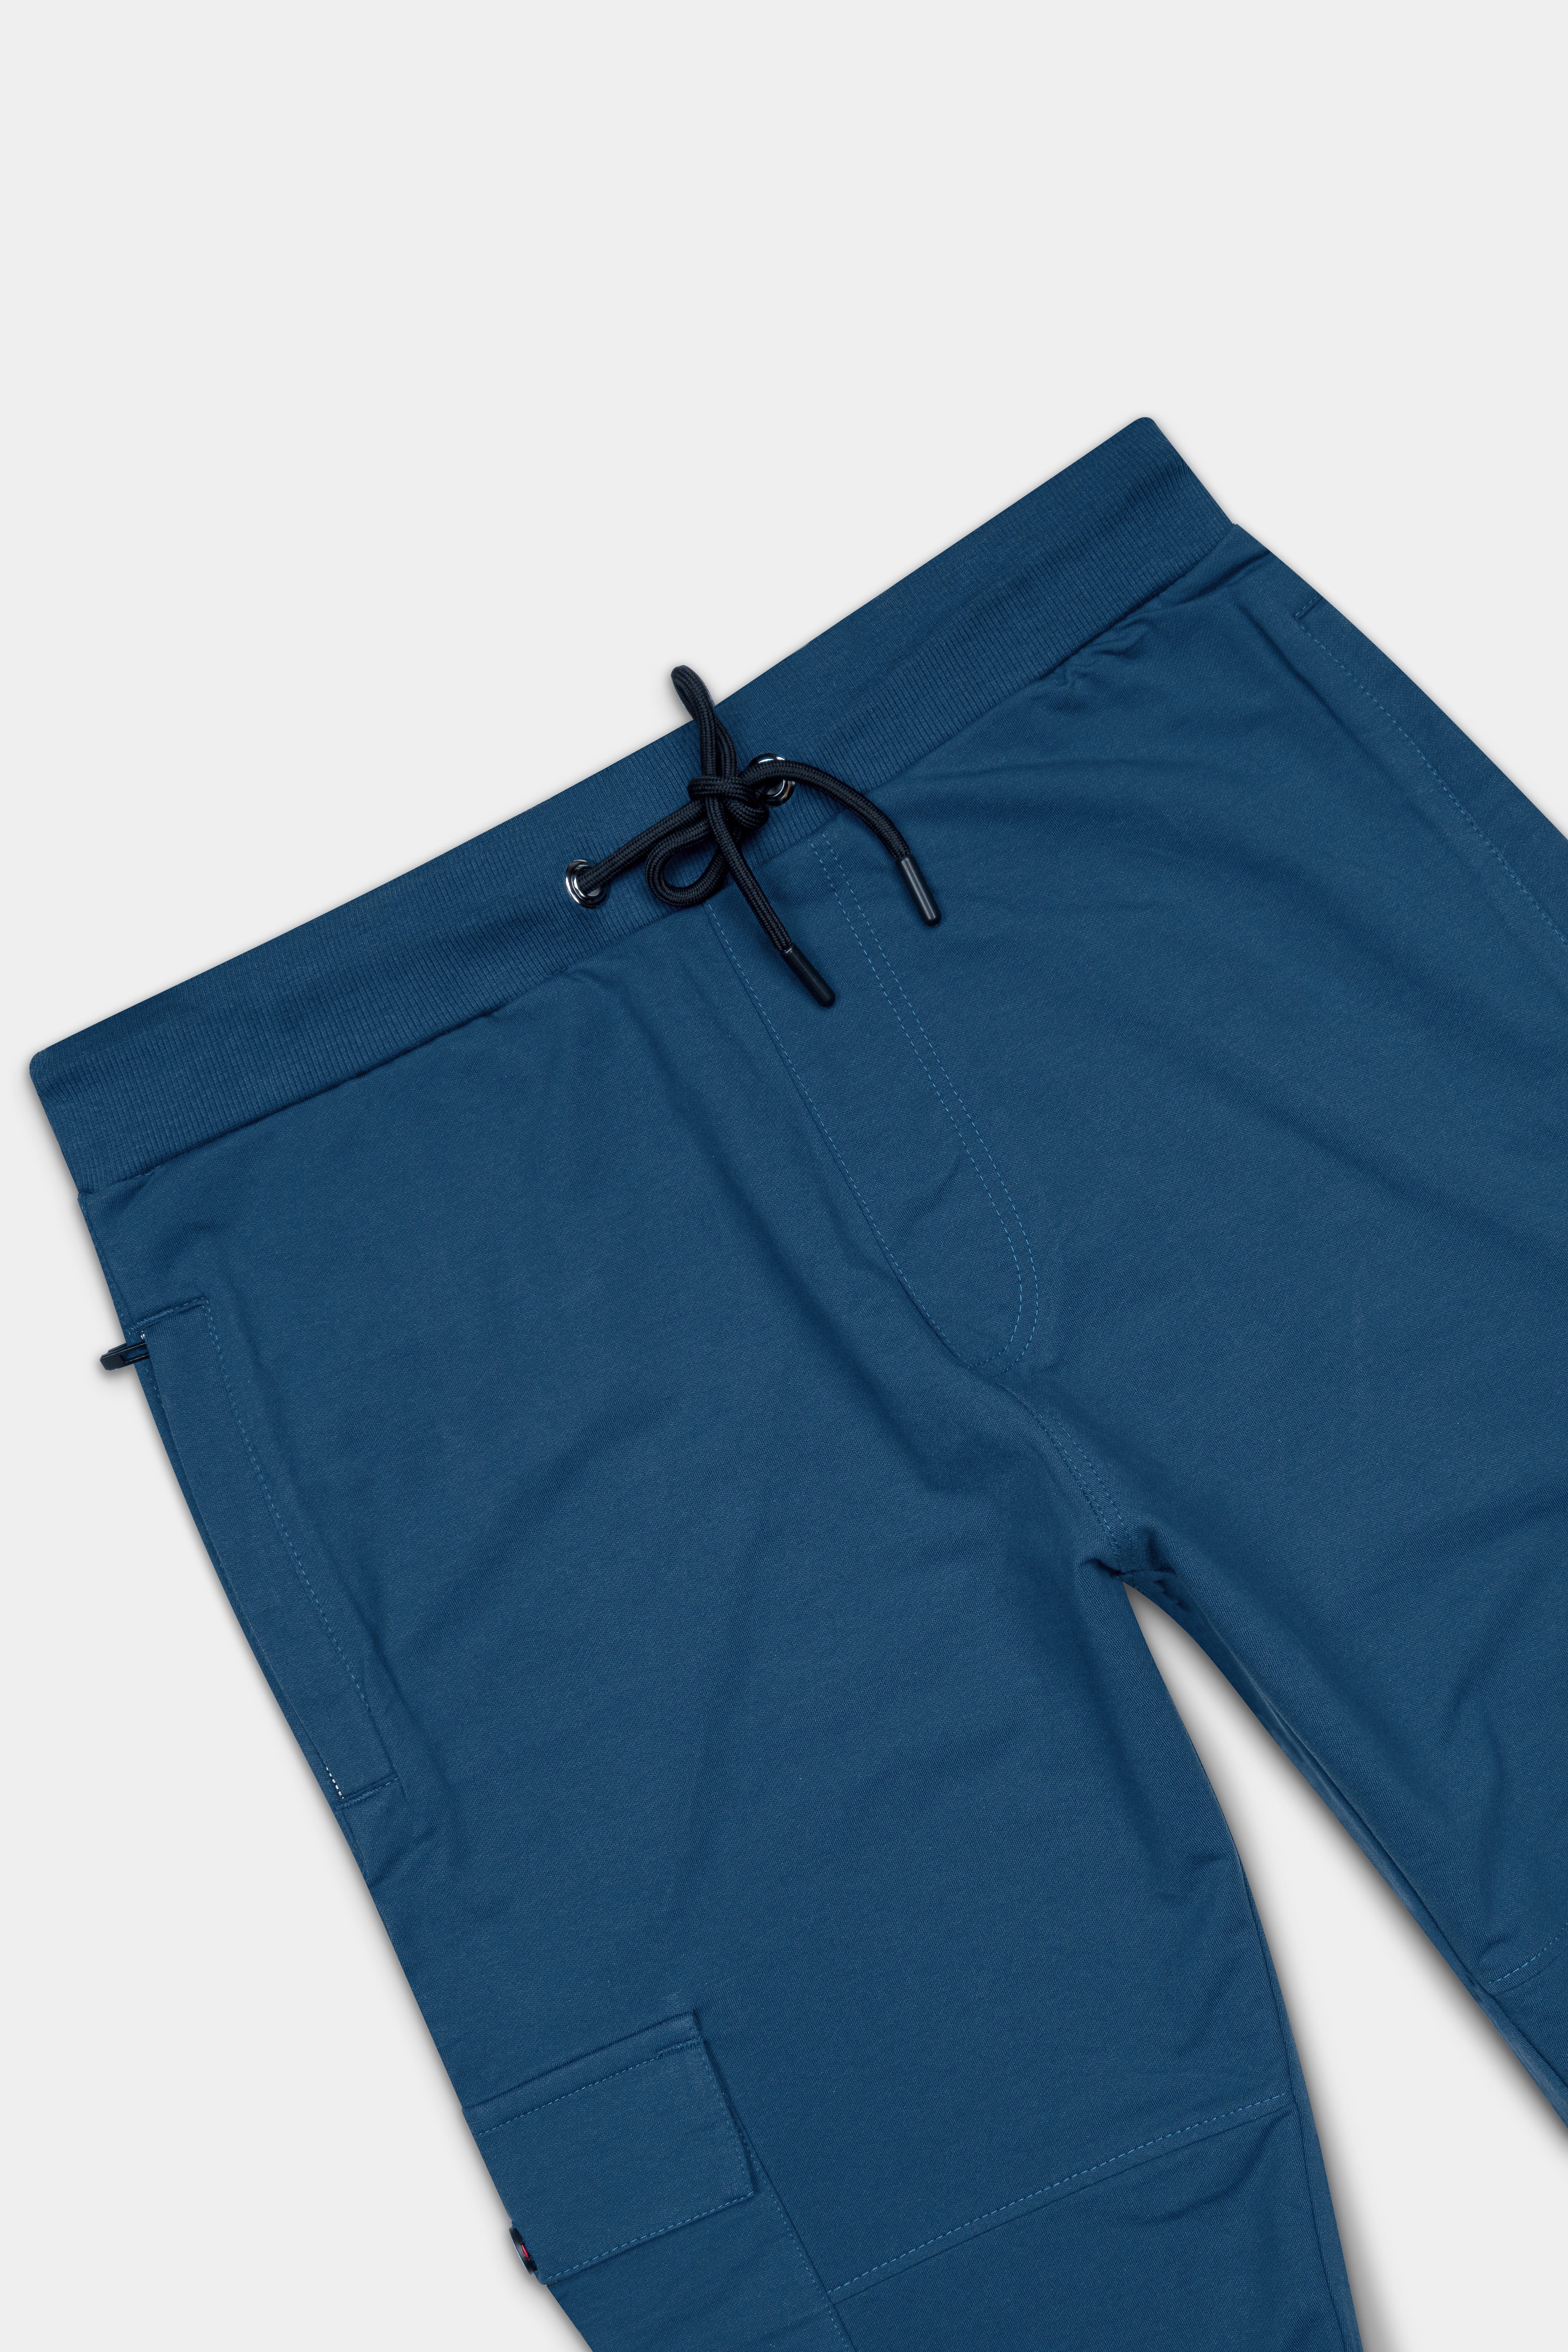 Nile Blue Premium French Terry Cotton Cargo Joggers